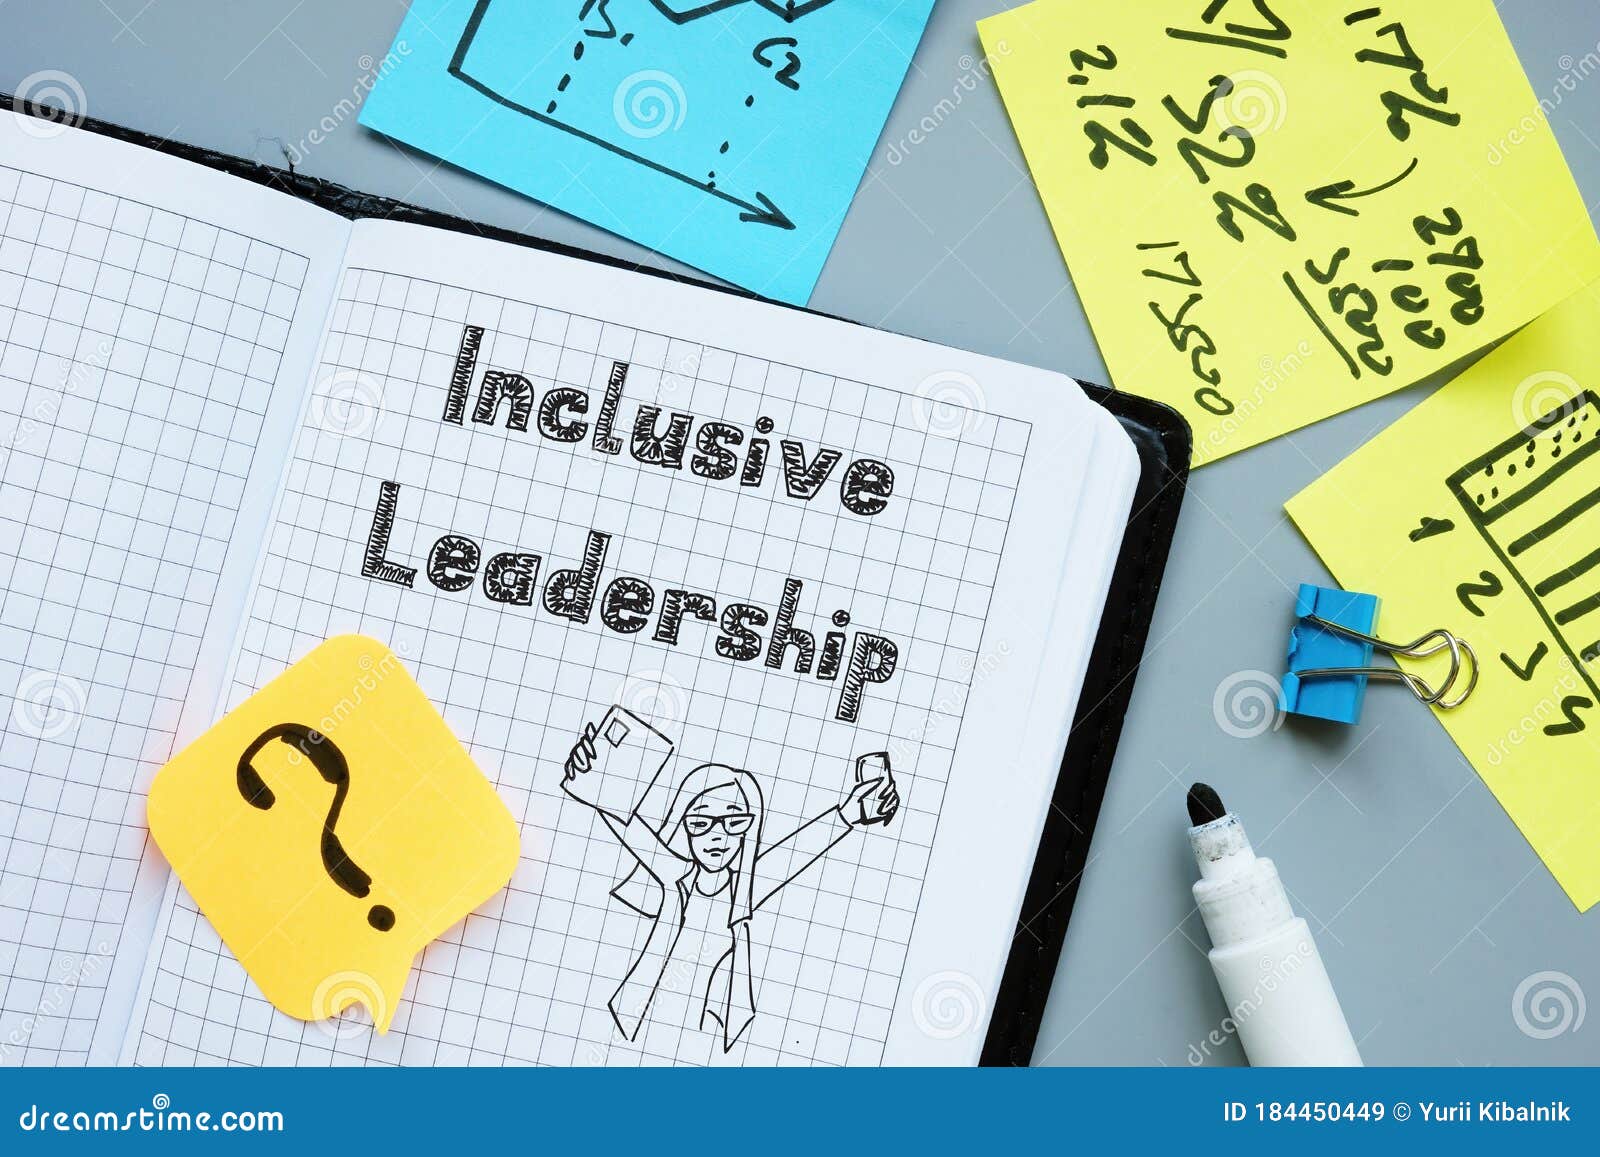 conceptual photo about inclusive leadership with handwritten text